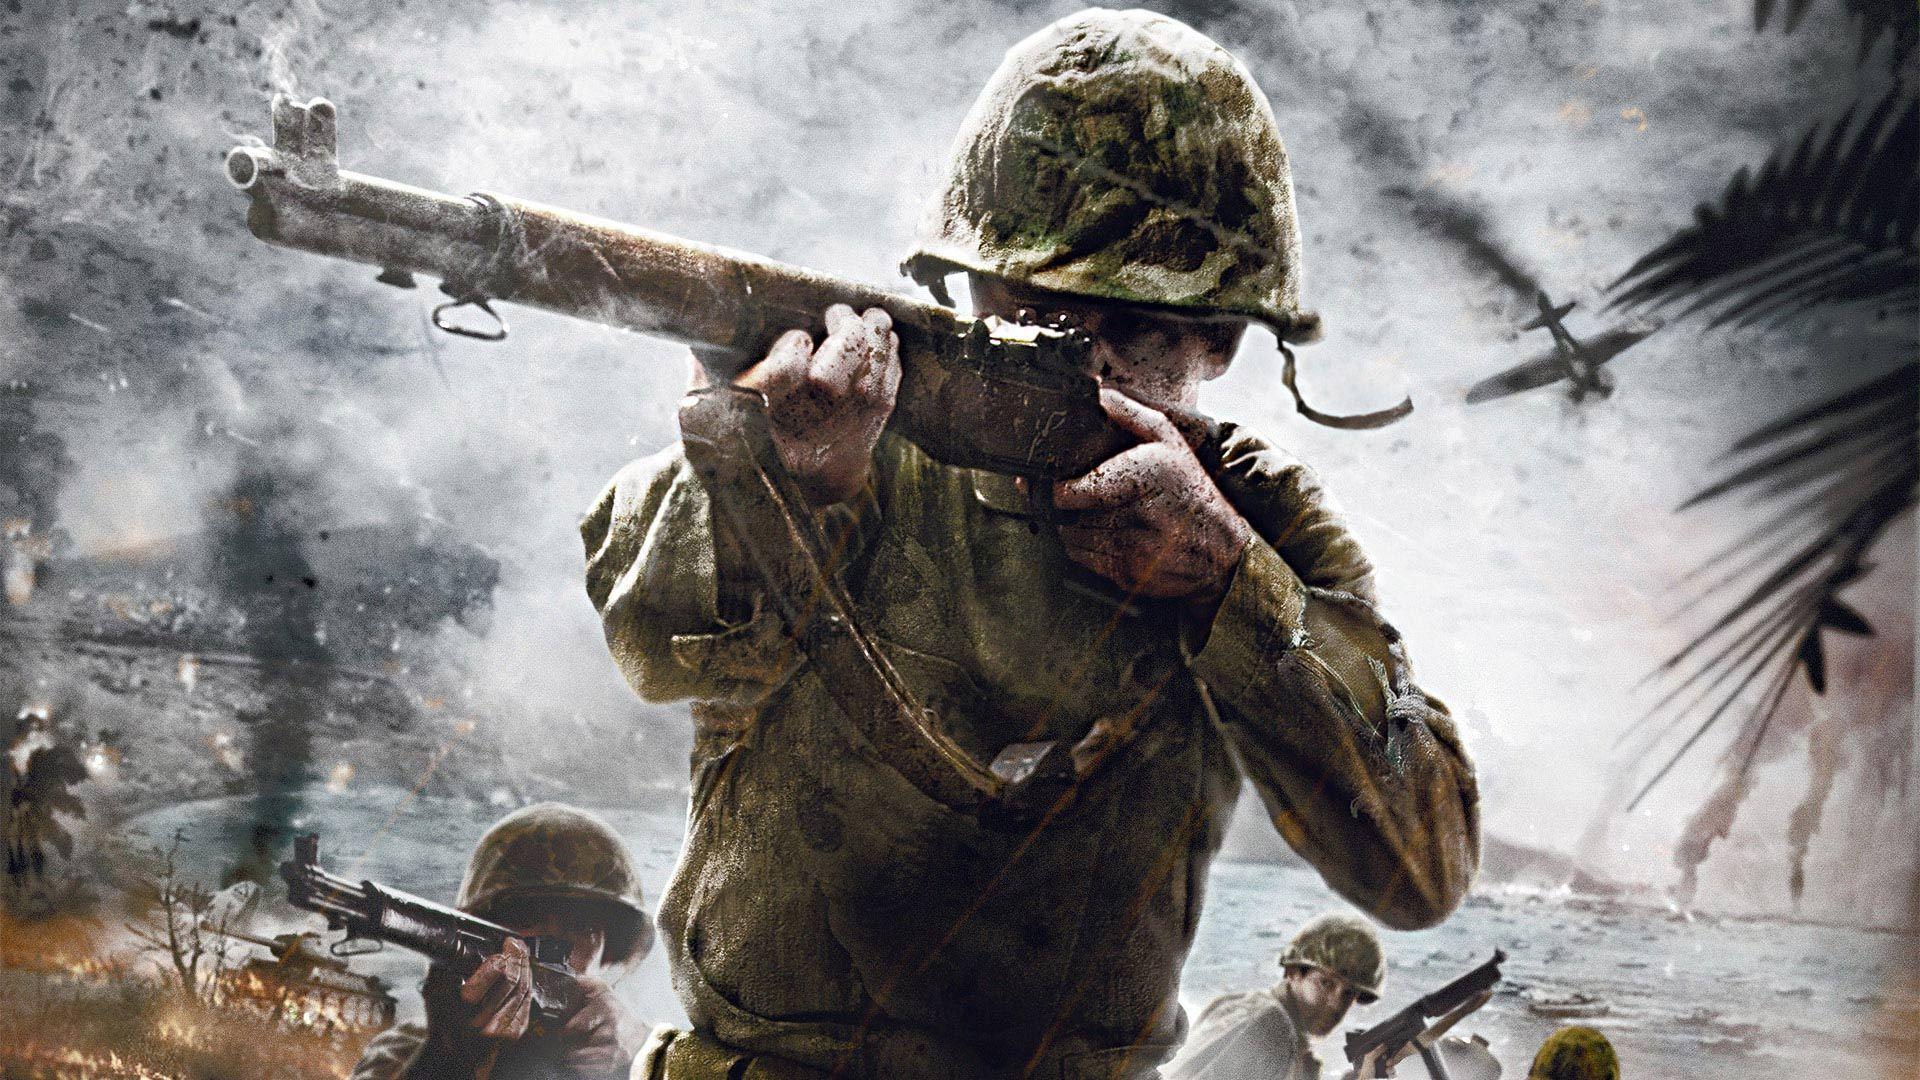 CoD WW2 Beta Update 1.03 Rolling Out Across Xbox One